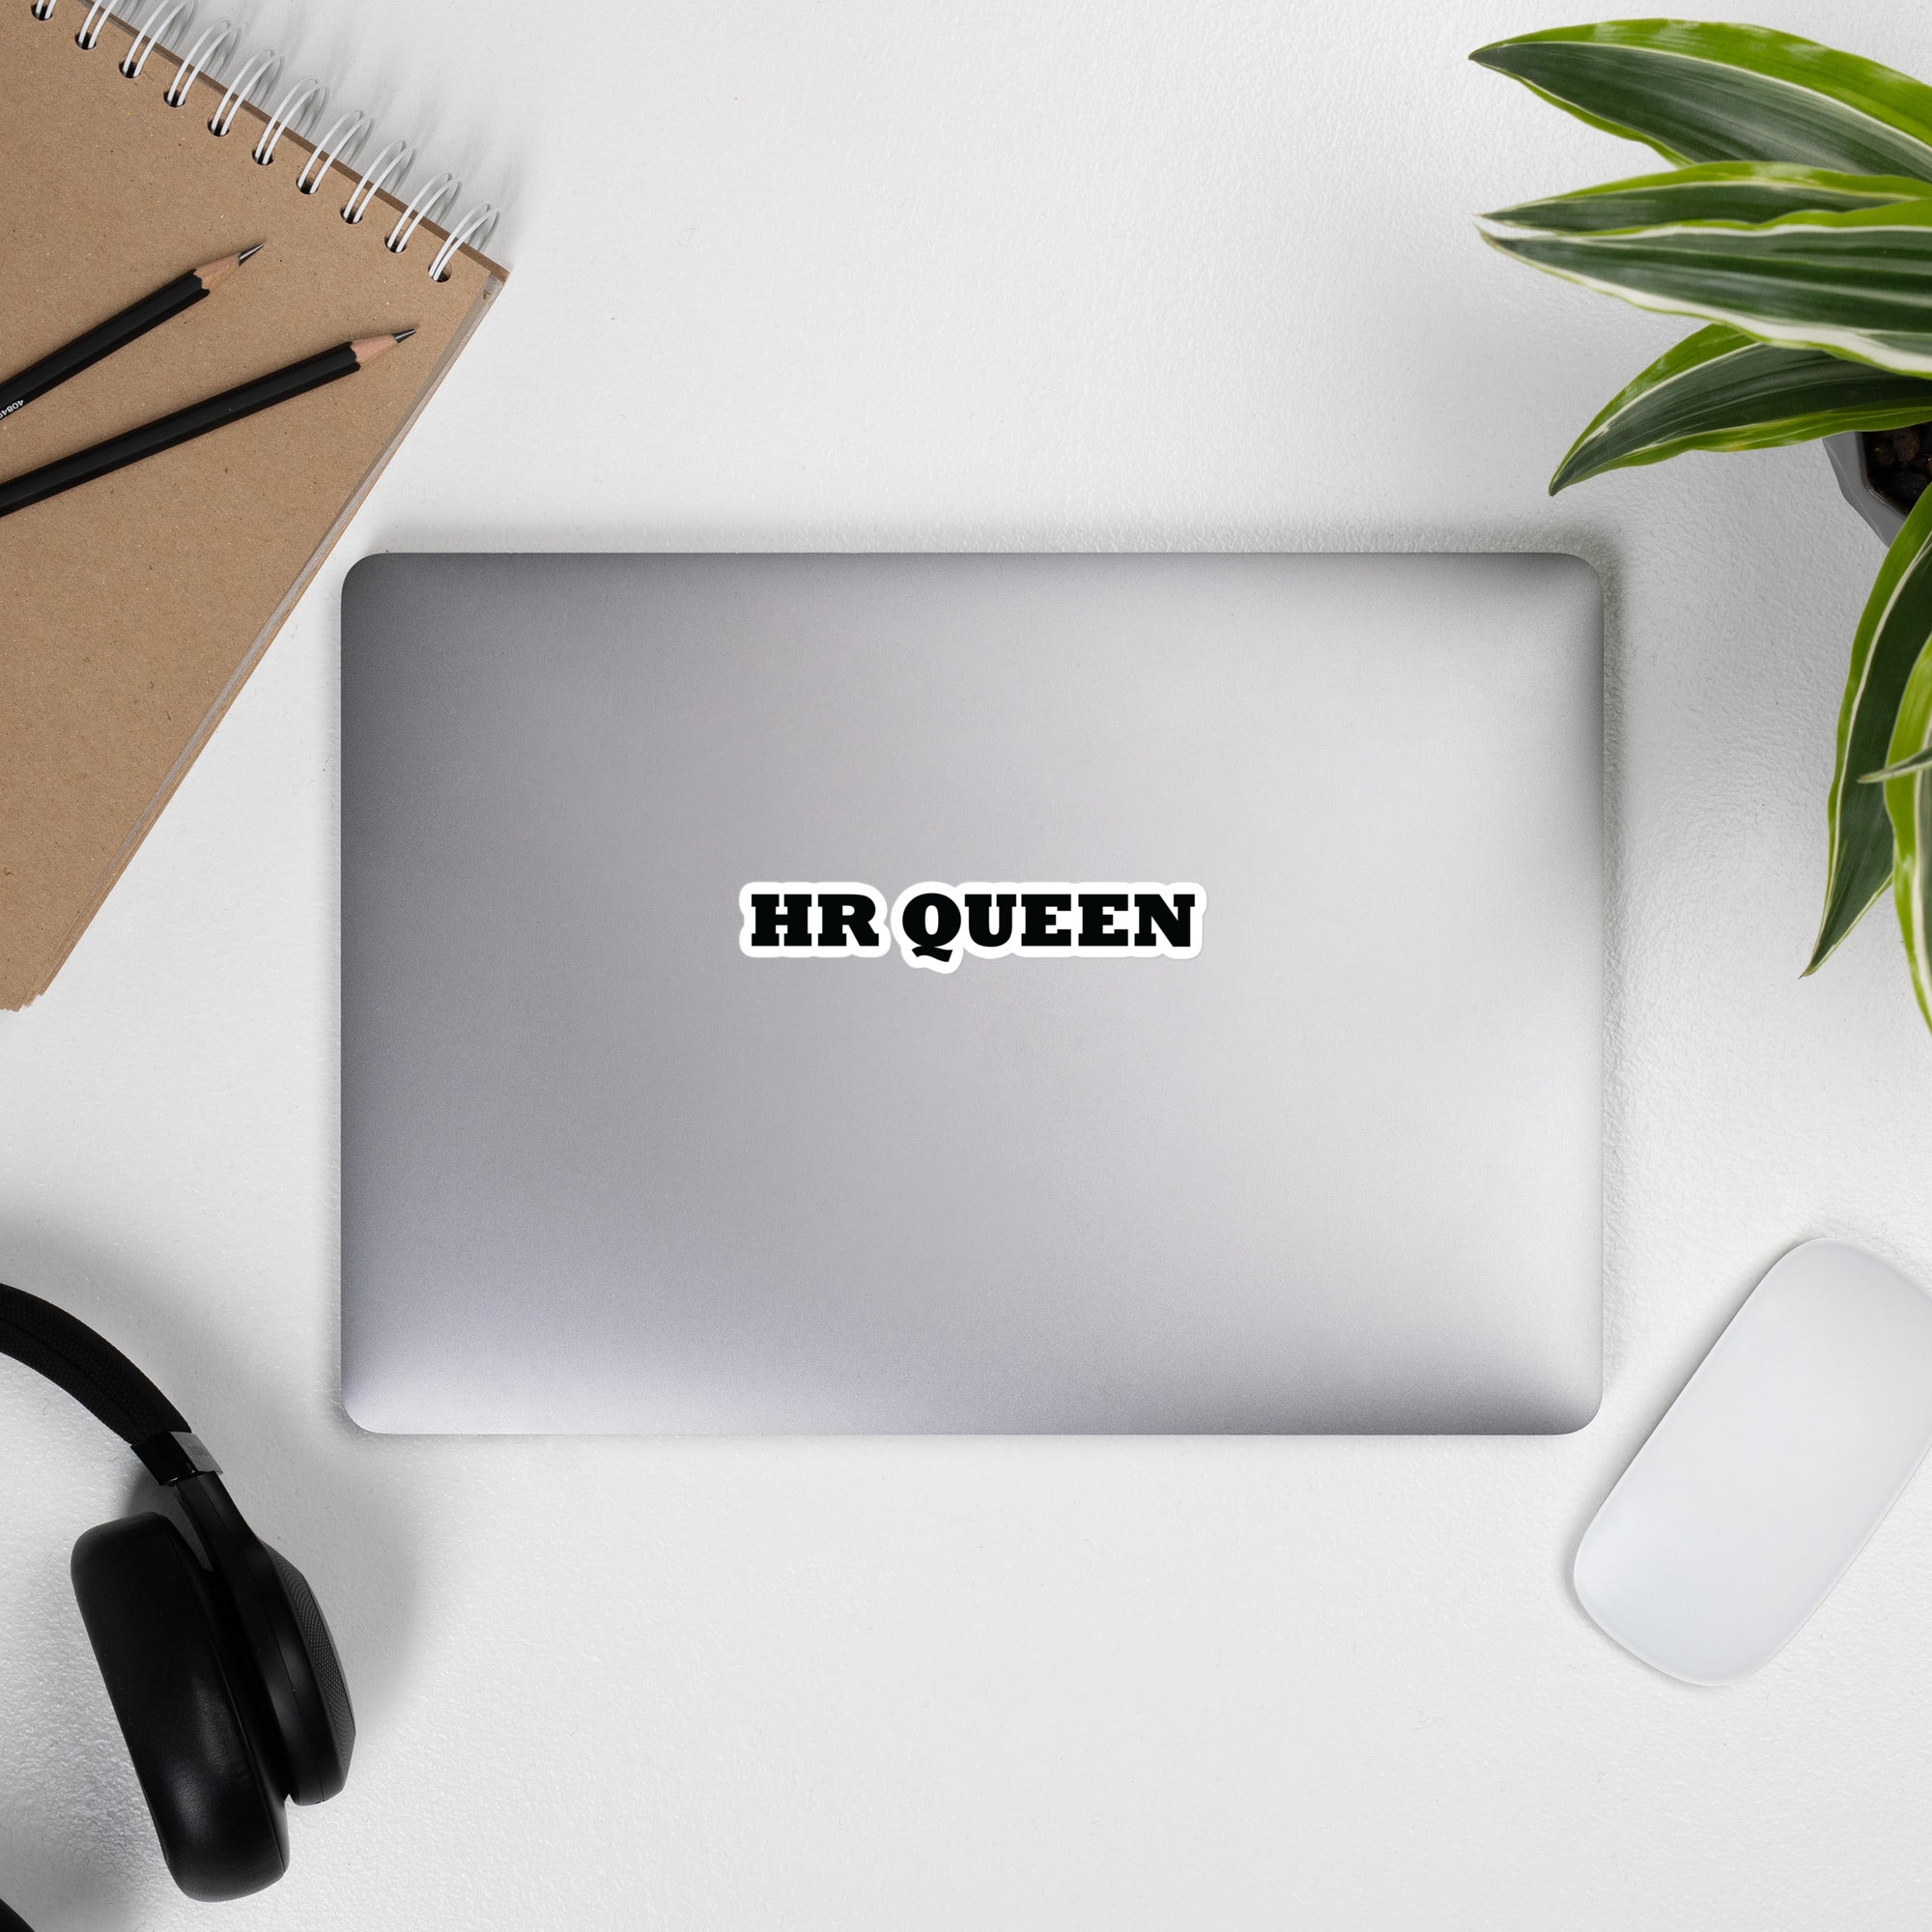 Bubble-free stickers | HR Queen